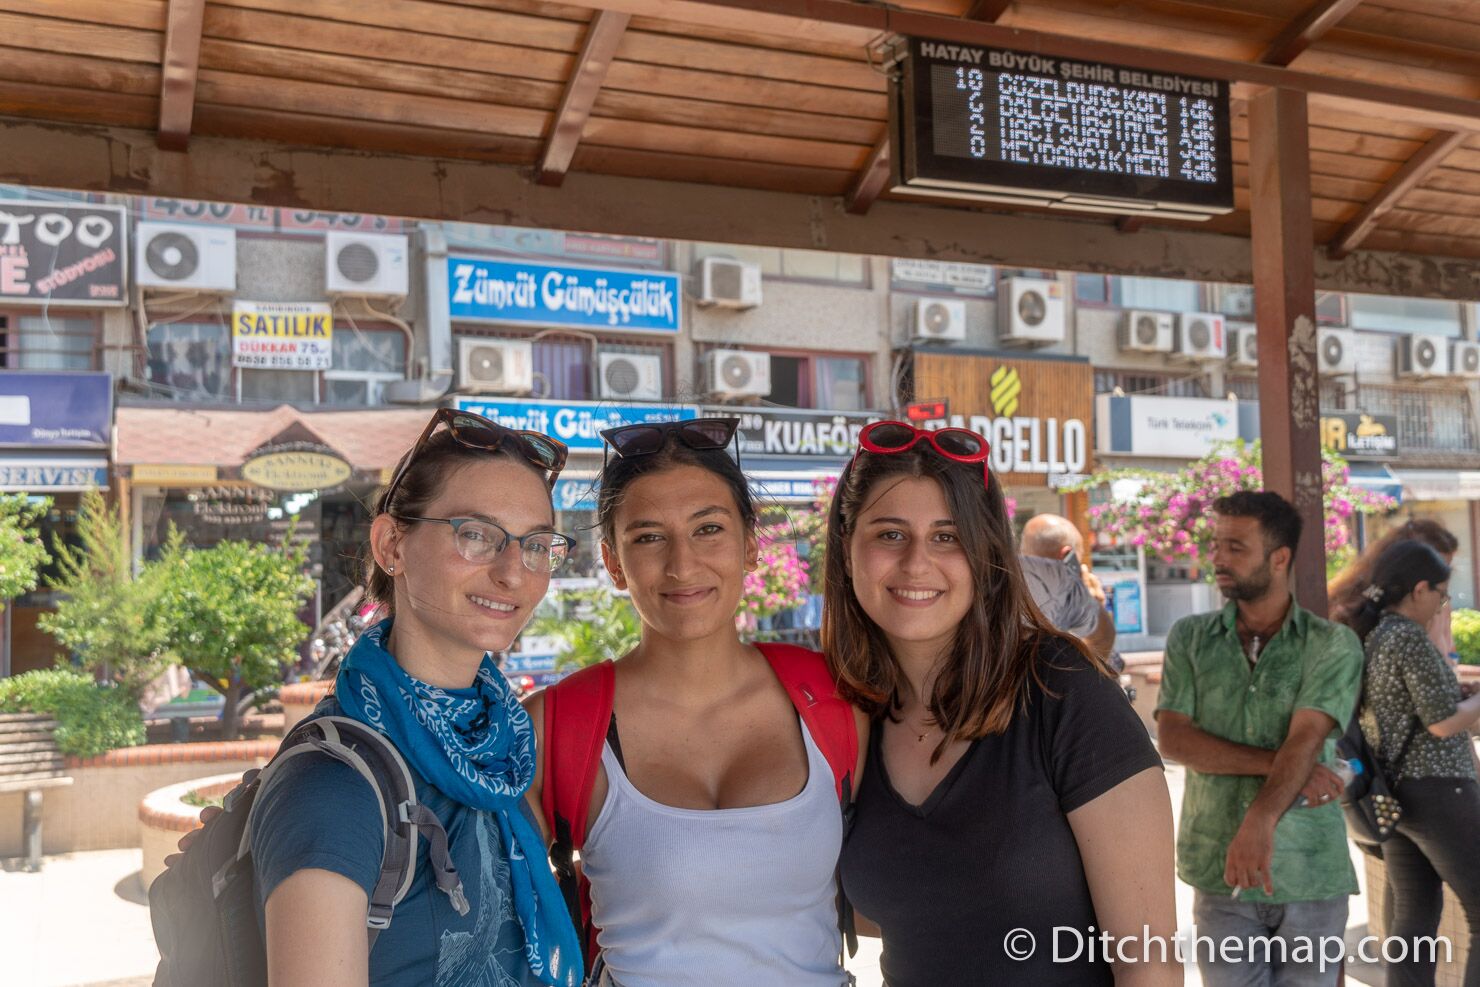 We Came For The Kunefe Turkey S Multicultural City Of Hatay Travel Blog And World Class Photography Travel Blog Ditch The Map